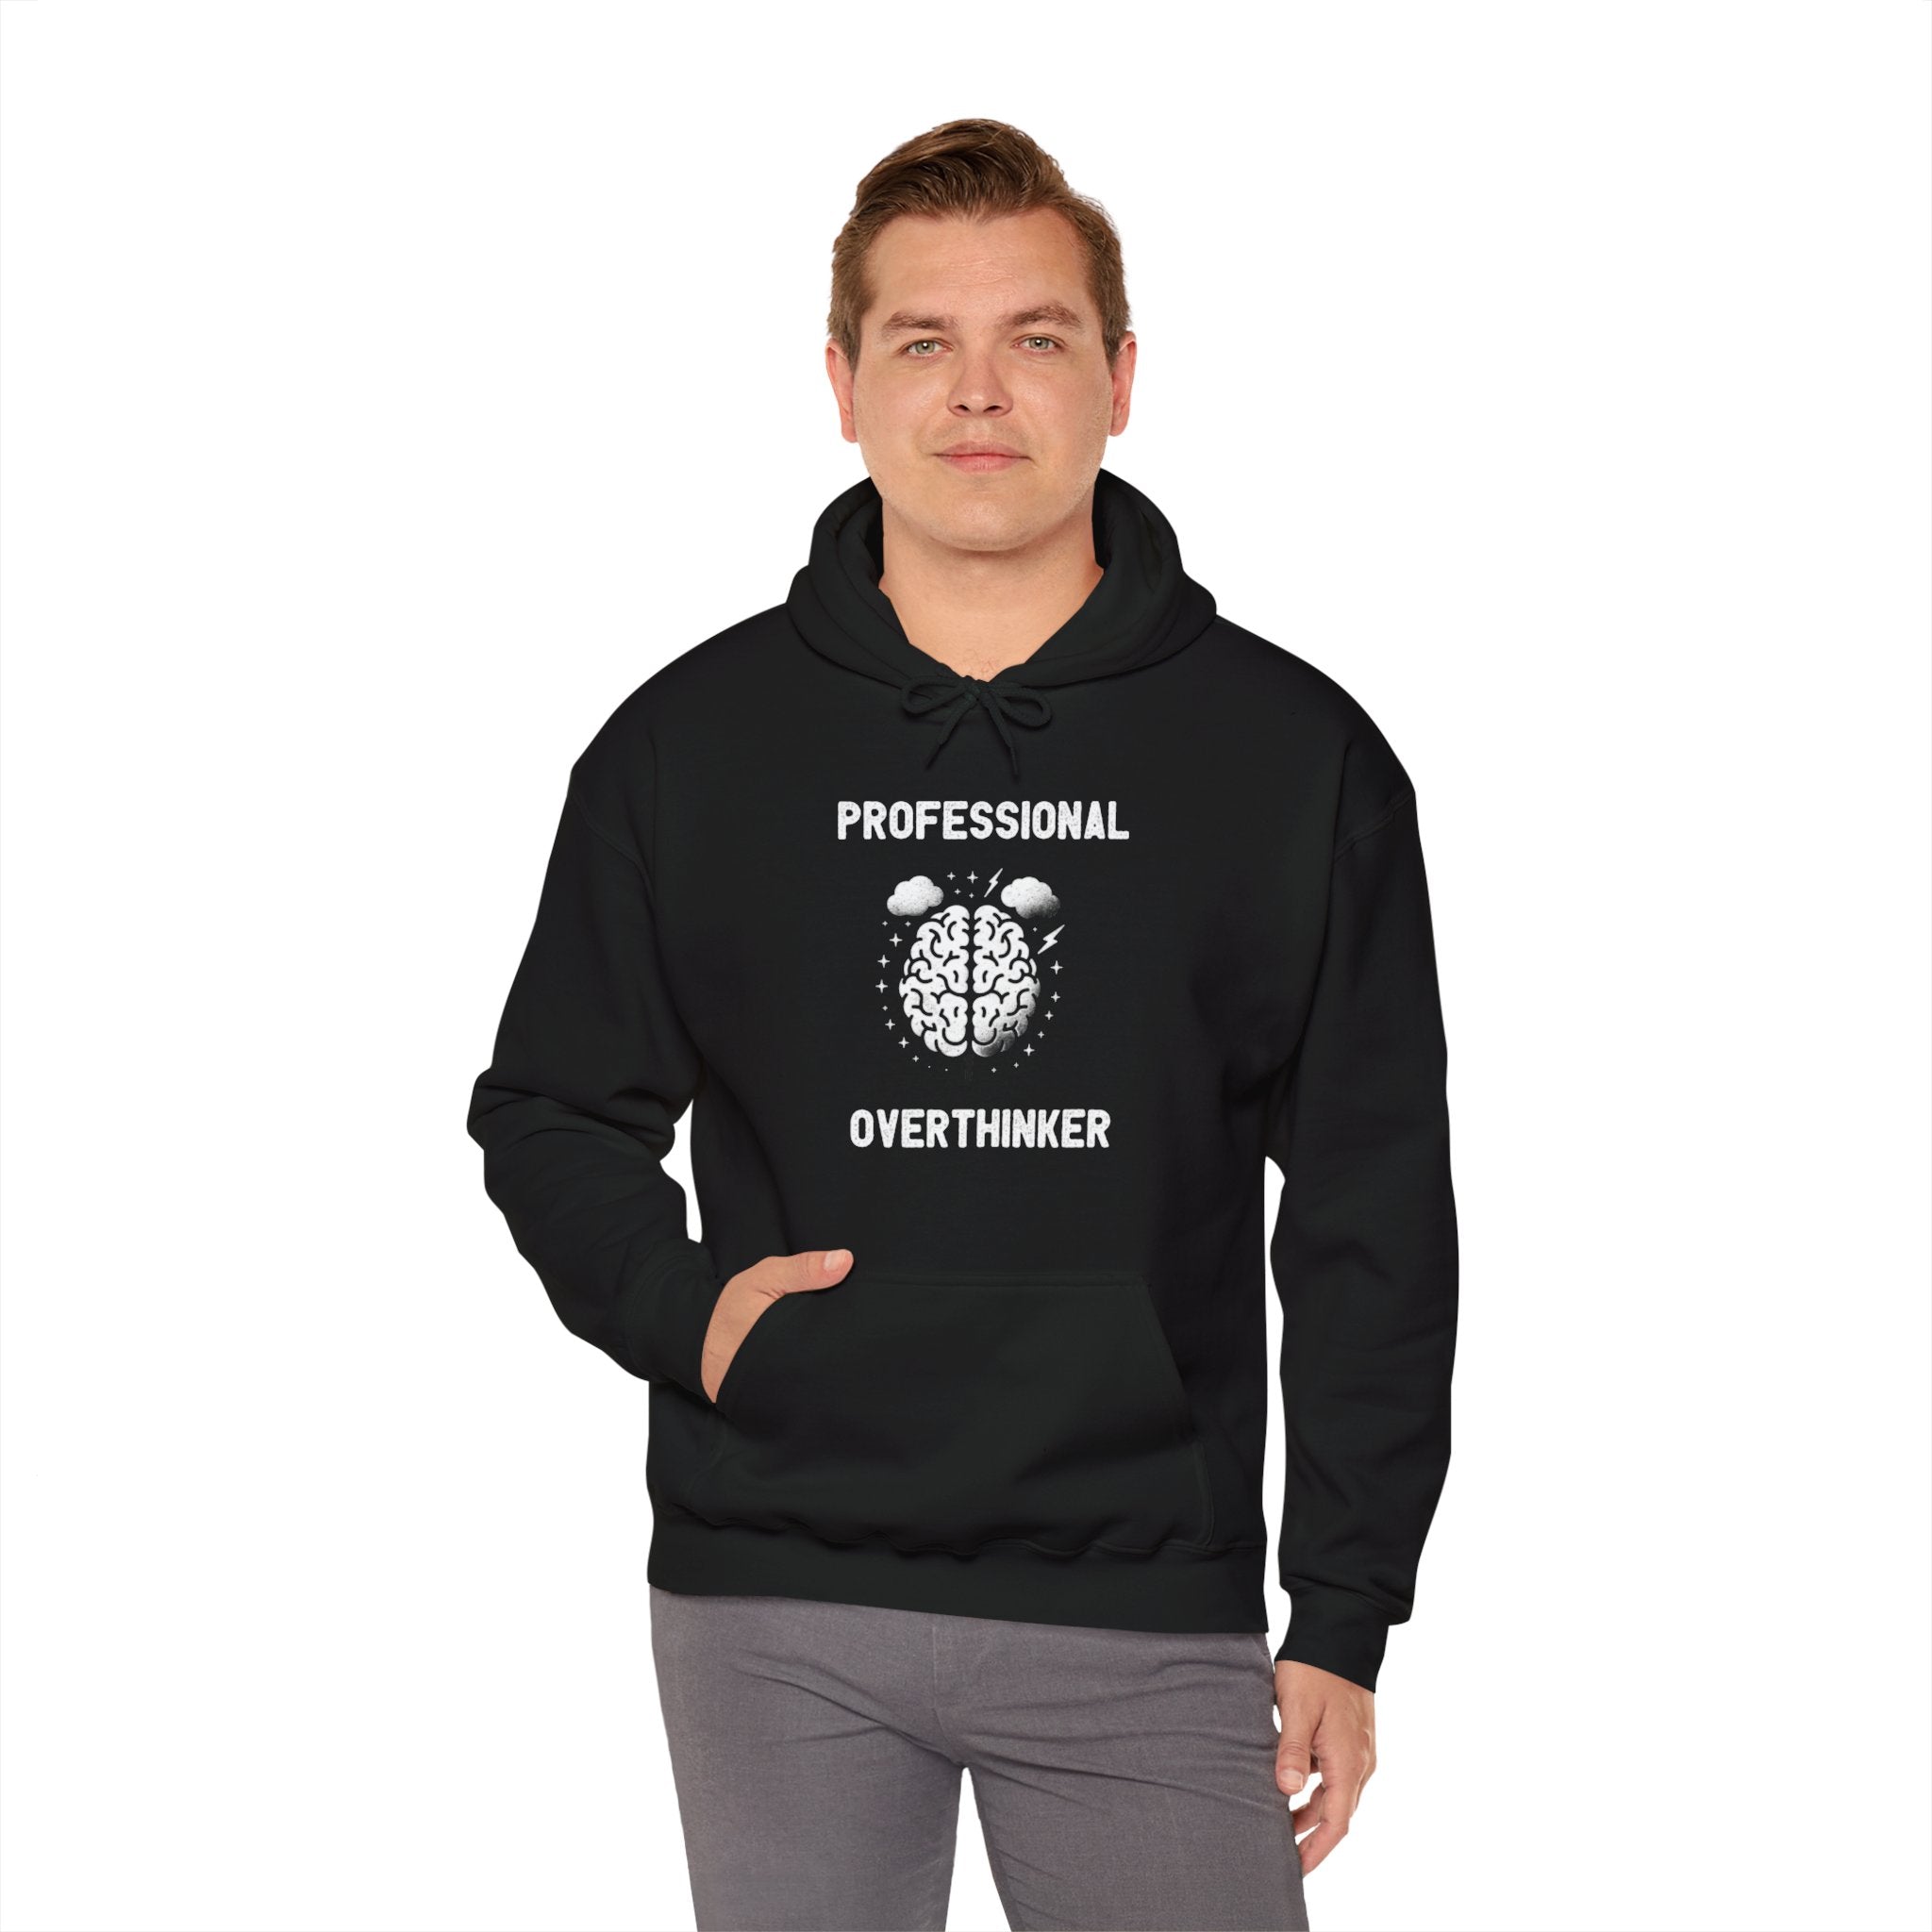 A man stands wearing the Professional Overthinker - Hooded Sweatshirt with a brain graphic on the front, epitomizing casual fashion.